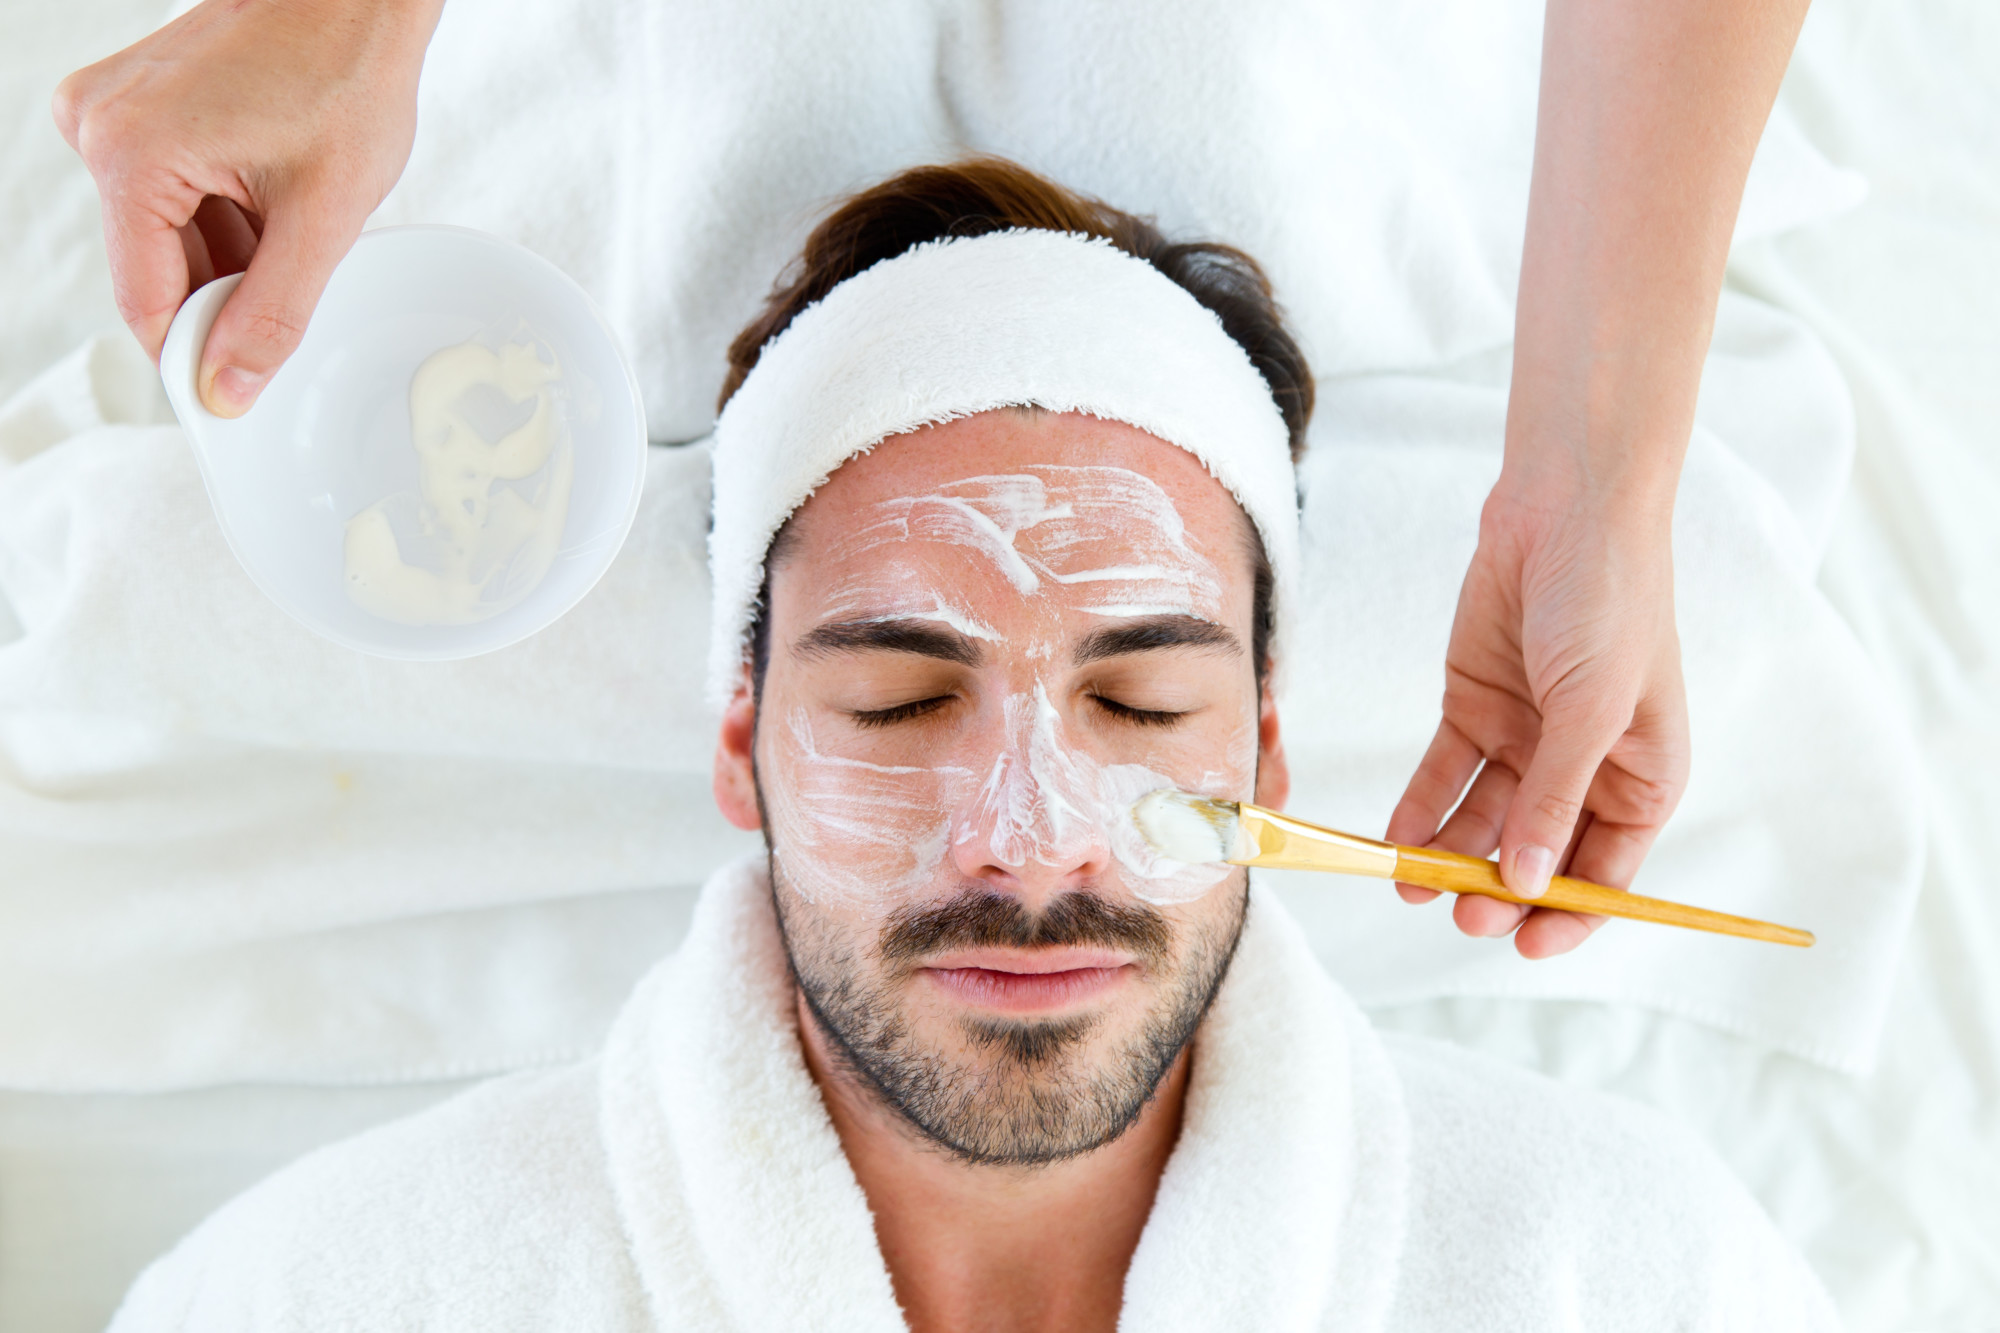 How a Hydro Facial Can Help Improve Your Skin